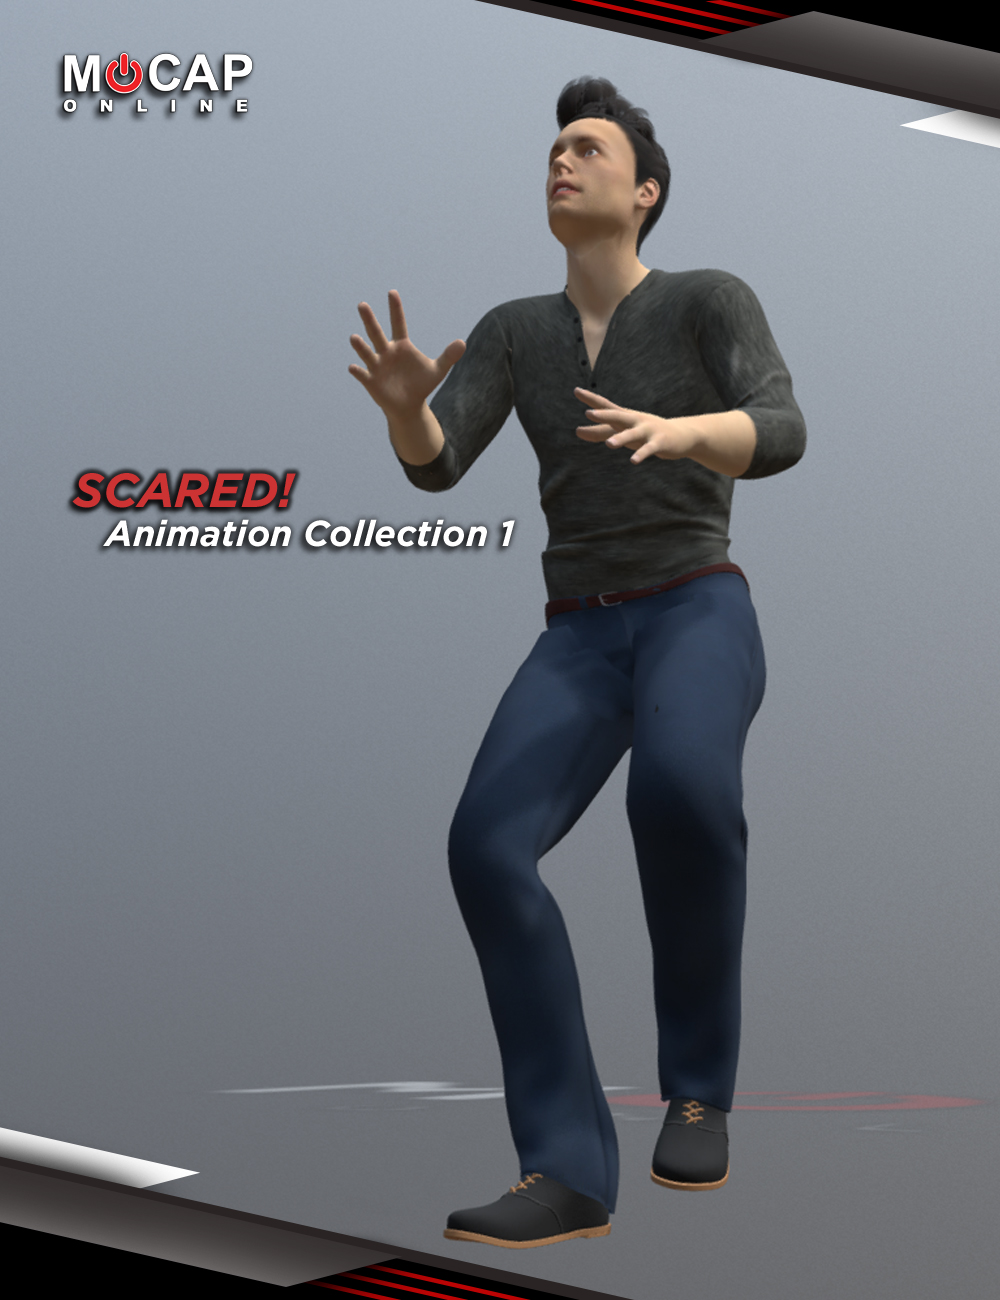 Scared! Animation Collection P1 - Michael 8 by: Mocap Online, 3D Models by Daz 3D